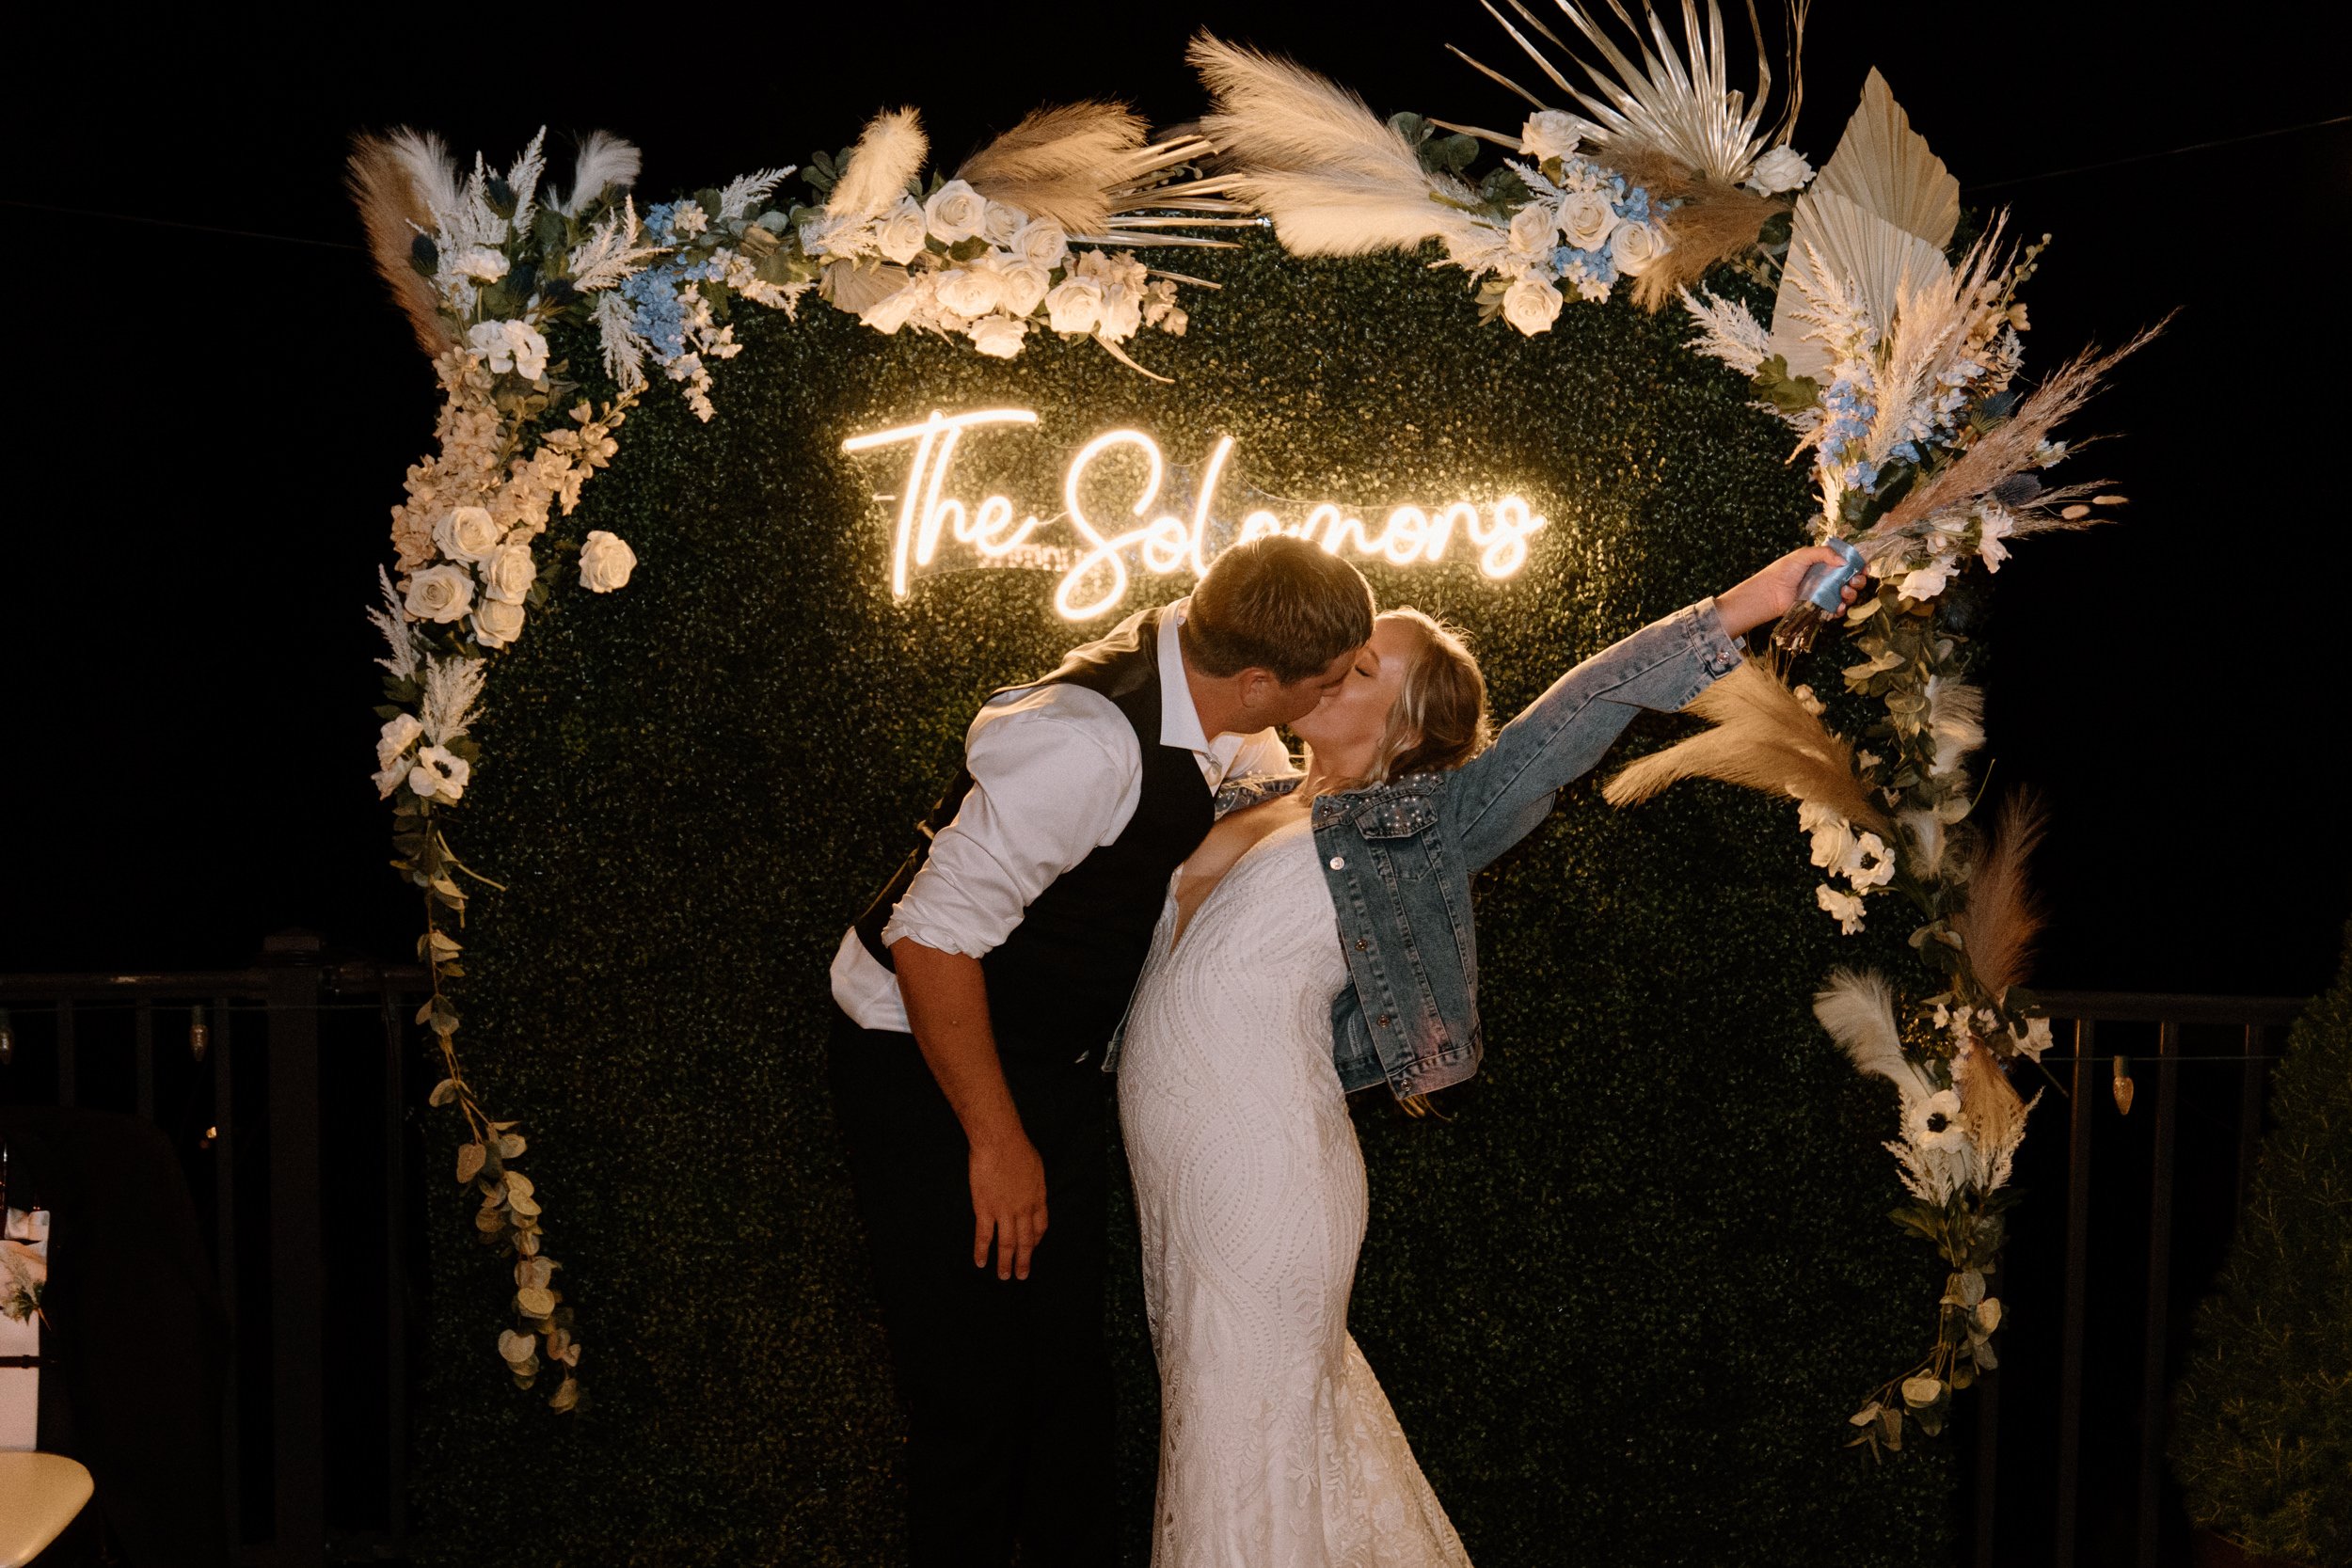 The bride and groom kiss in front of the neon sign that reads "The Solomons"